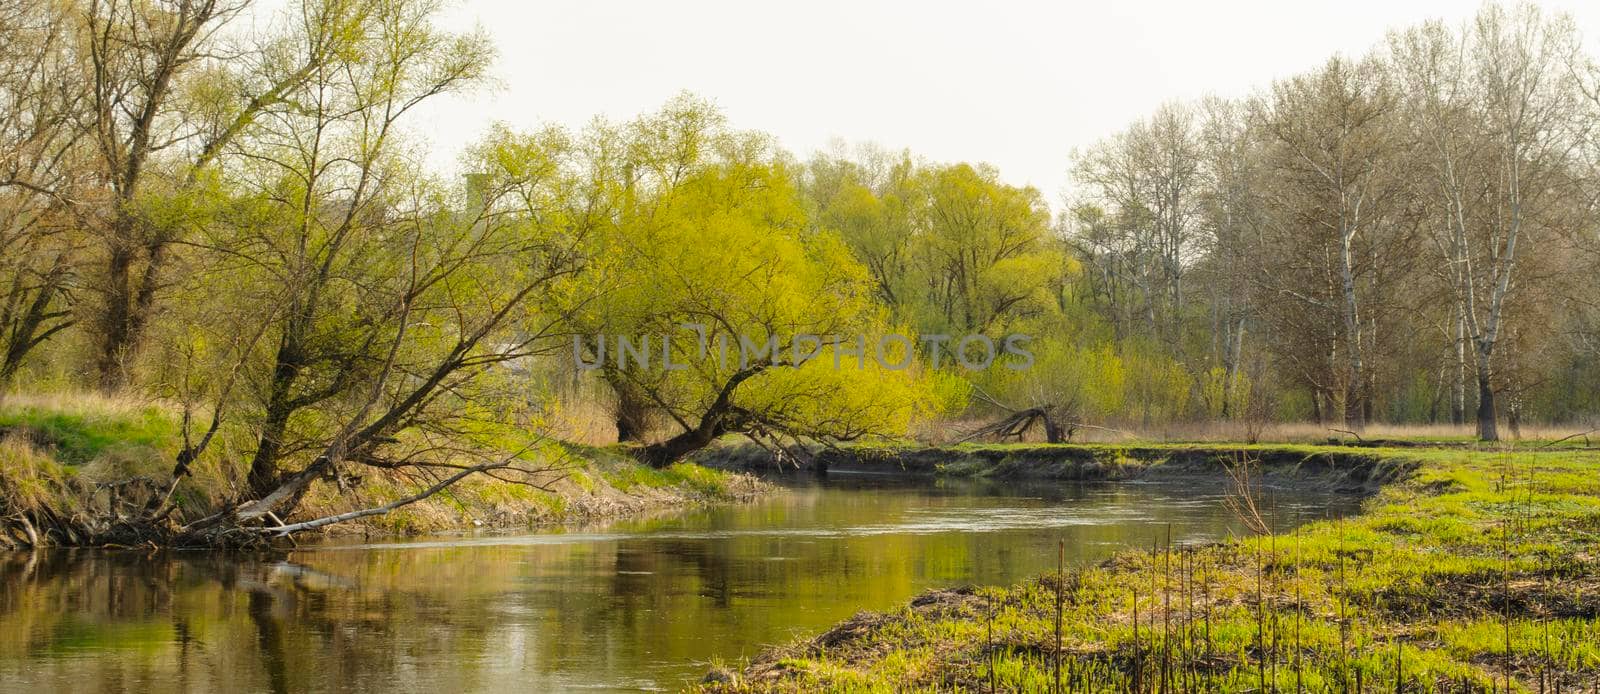 Spring landscape with a river and a grove of trees reflecting in the river.